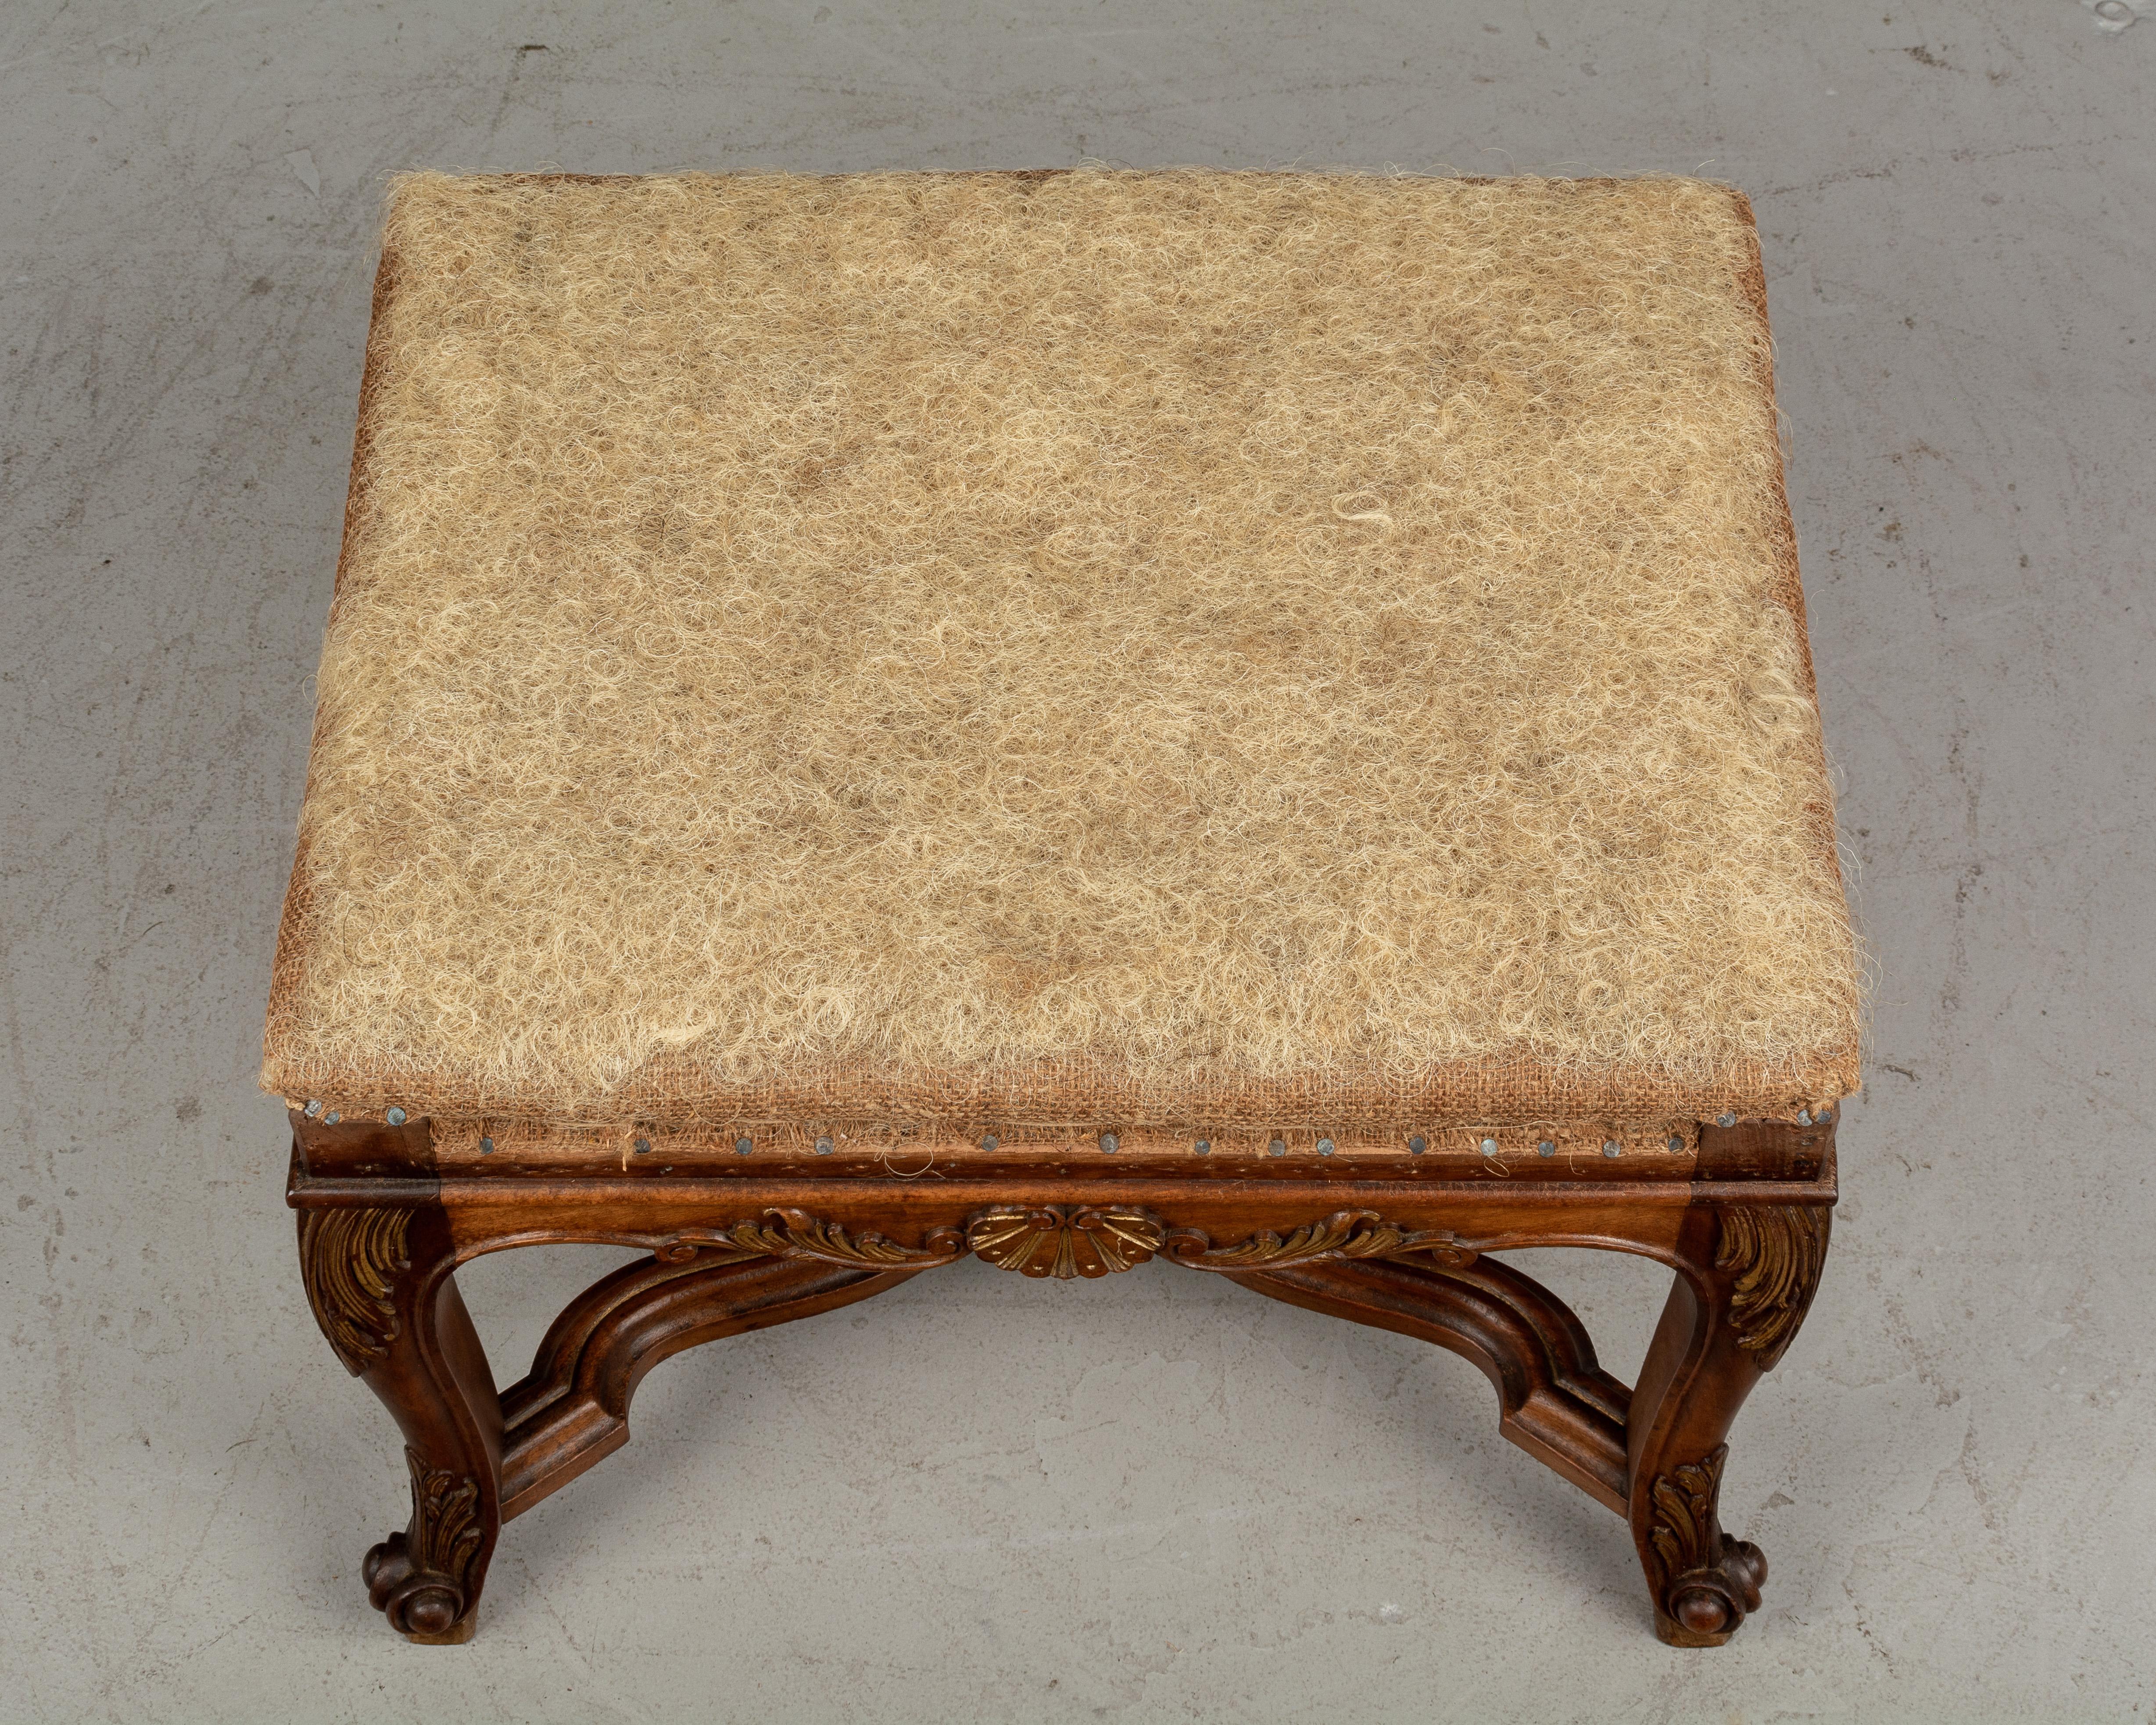 French Louis XV Style Foot Stool or Bench (20. Jahrhundert)